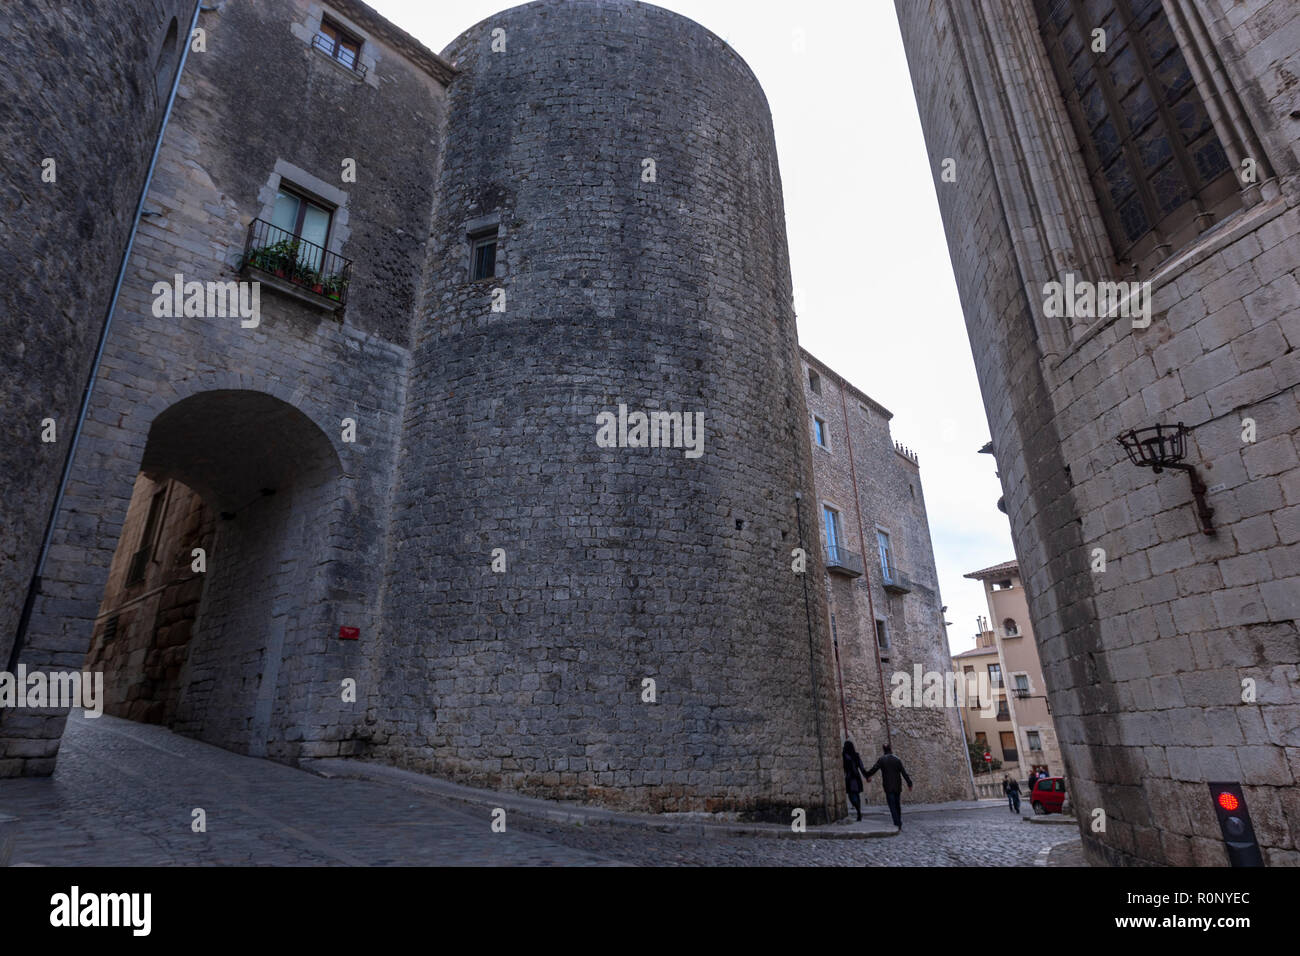 Pujada del Rei Martí in the medieval city of Girona, Catalonia, Spain Stock Photo